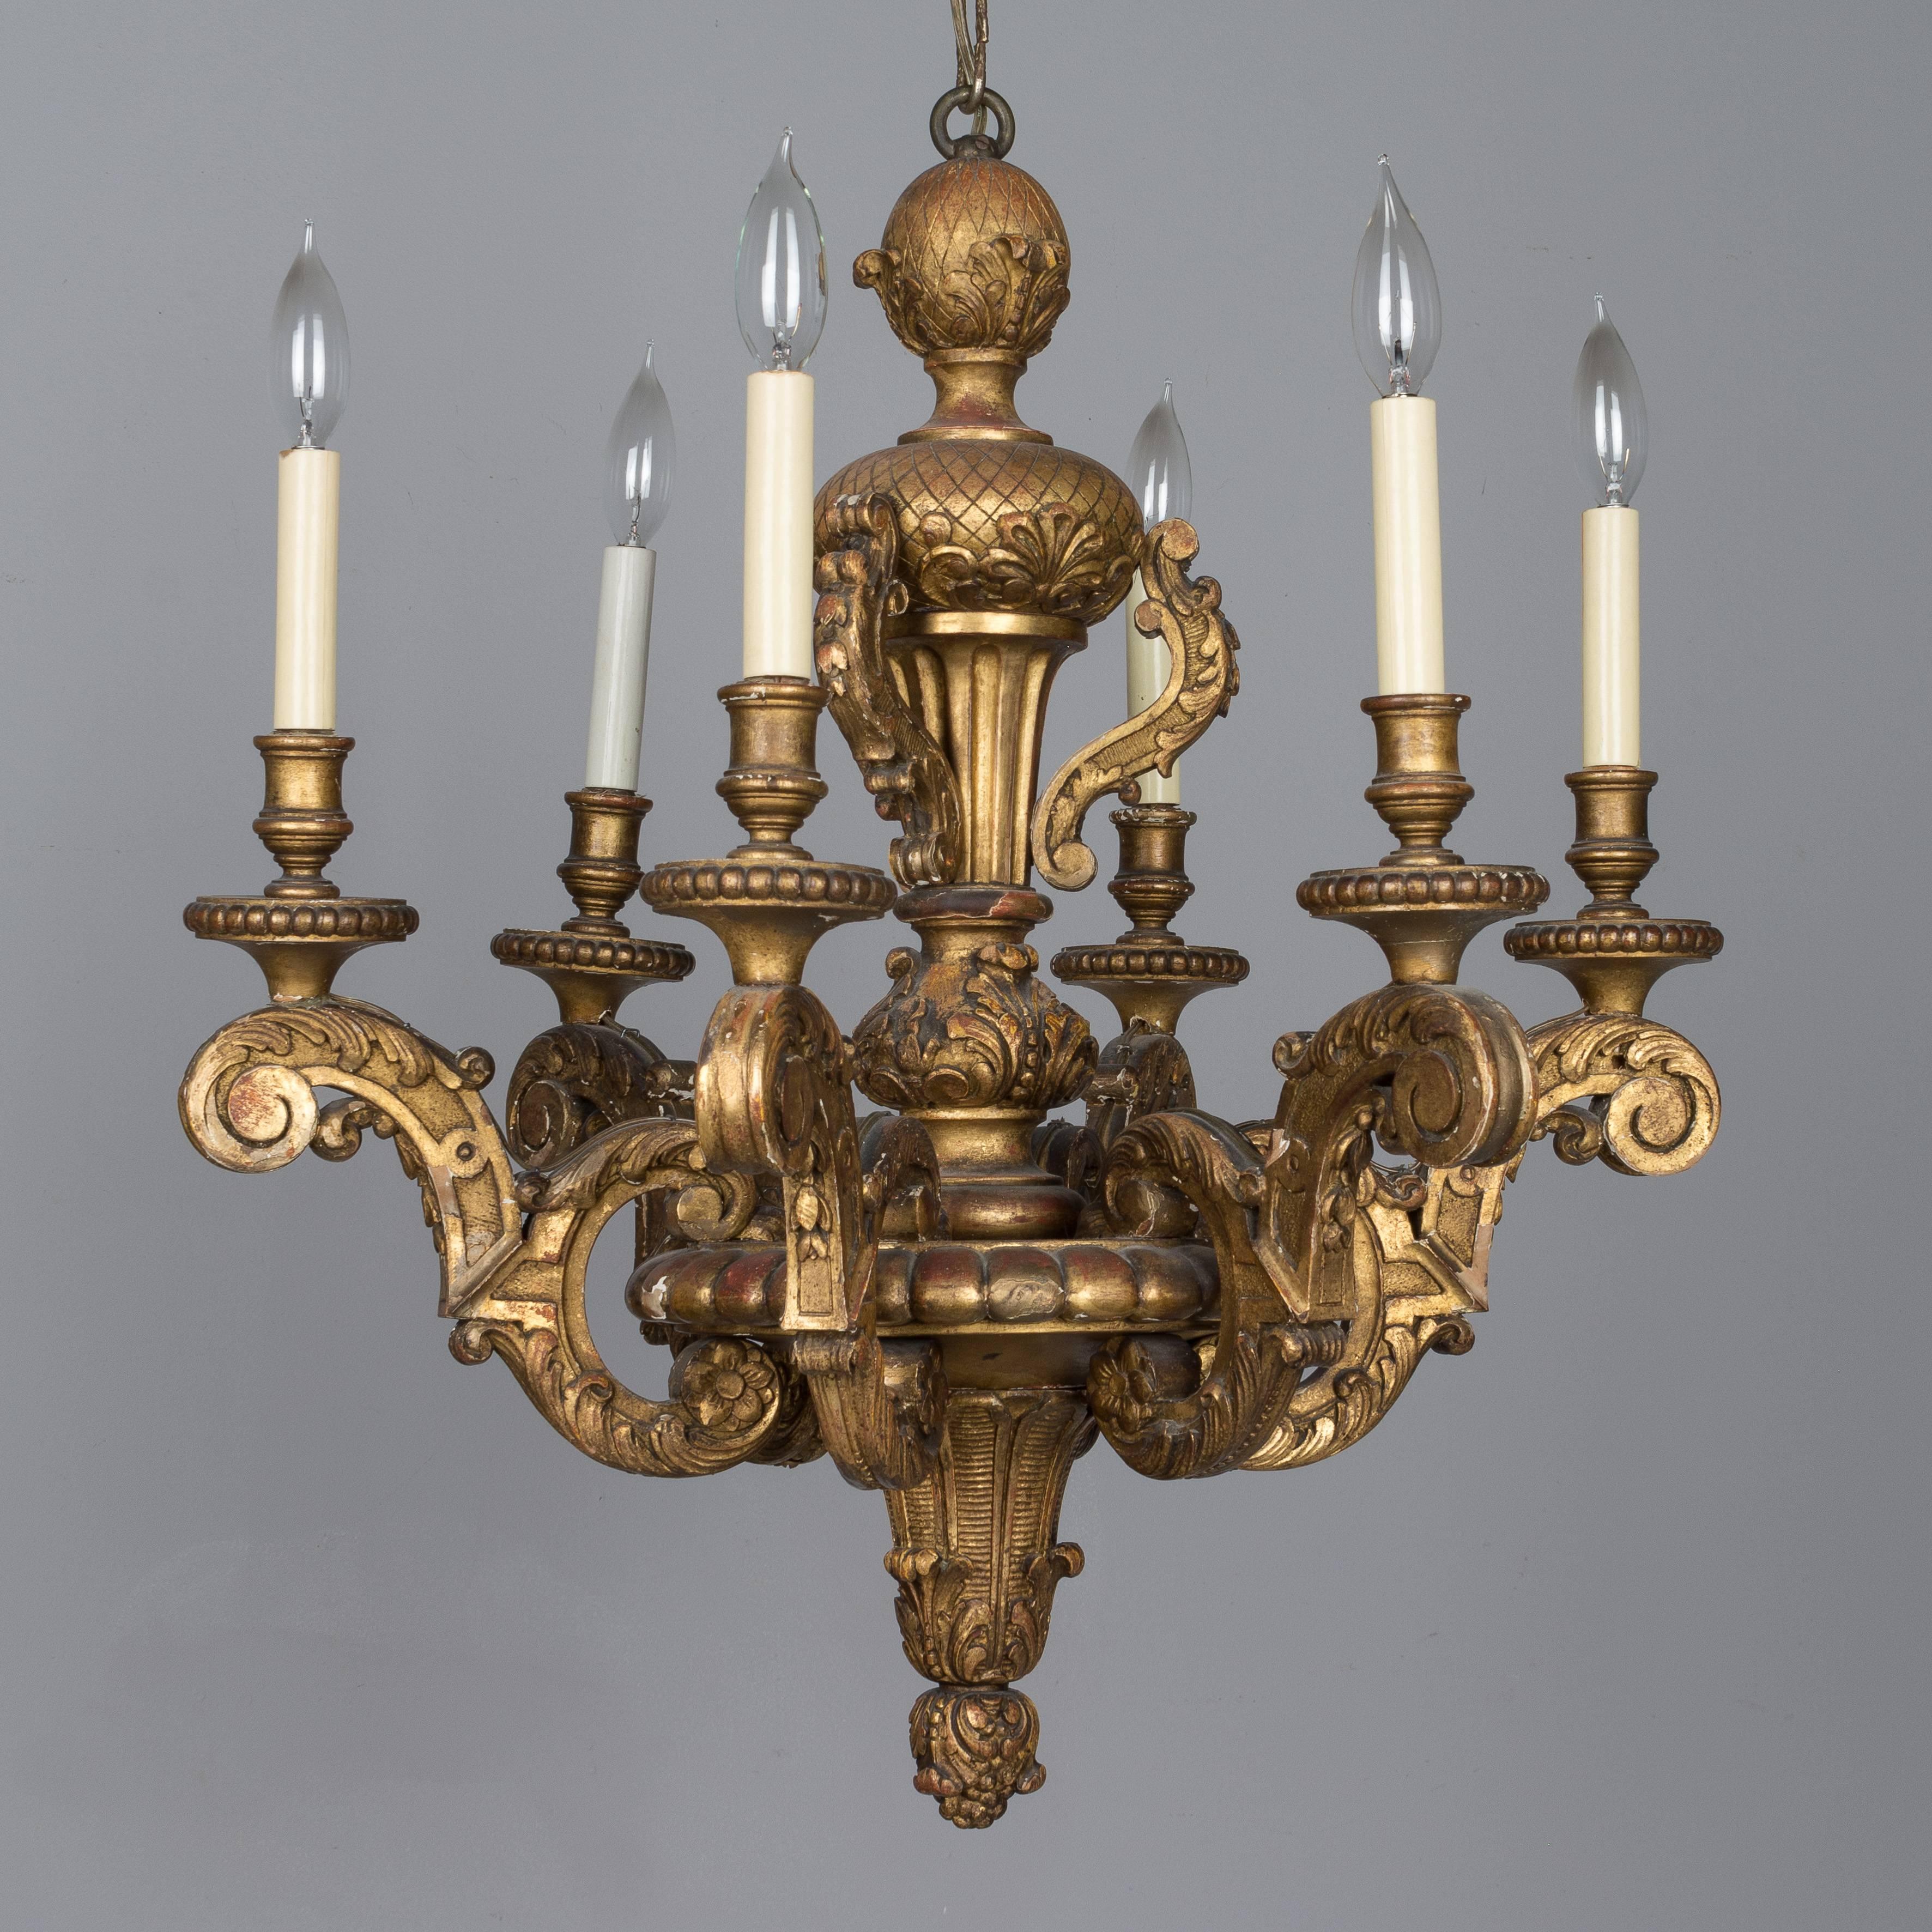 An early 20th century Italian giltwood six-light chandelier with boldly carved Baroque form. There are some losses to the gilt and it has been touched up in places. In overall good condition. Wired with new sockets and candle covers. Please refer to